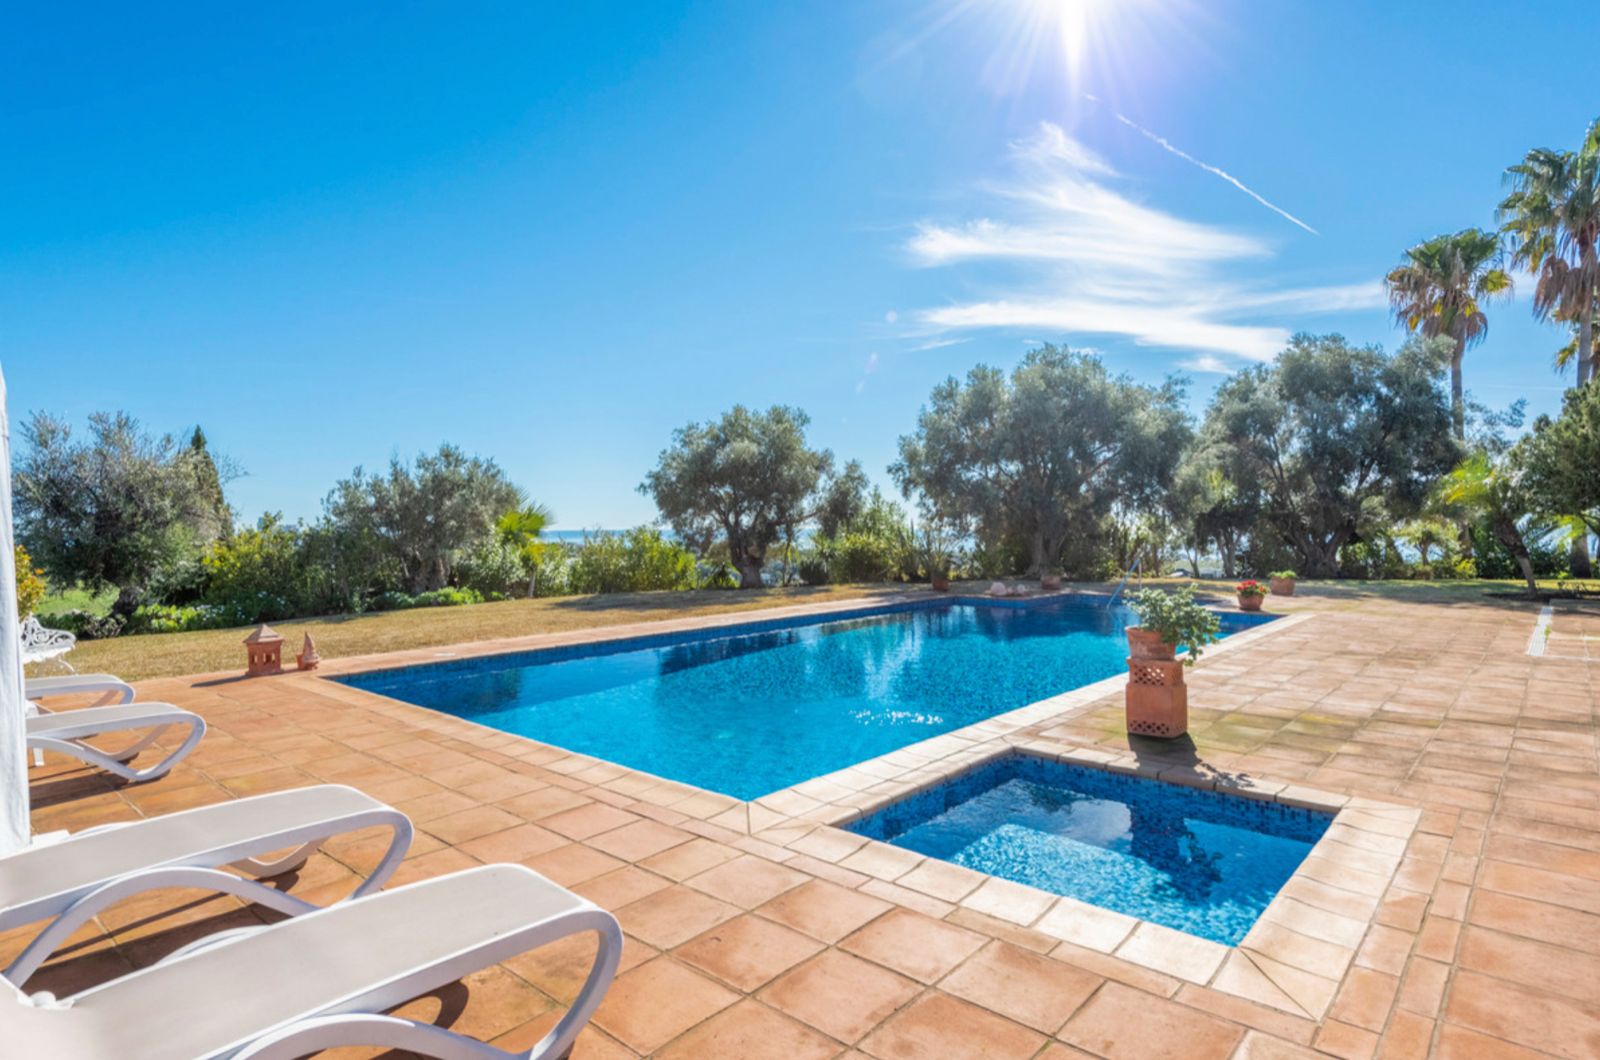 Fantastic villa in El Paraiso Alto with far-reaching sea and golf views close to all kind of amenities and golf courses